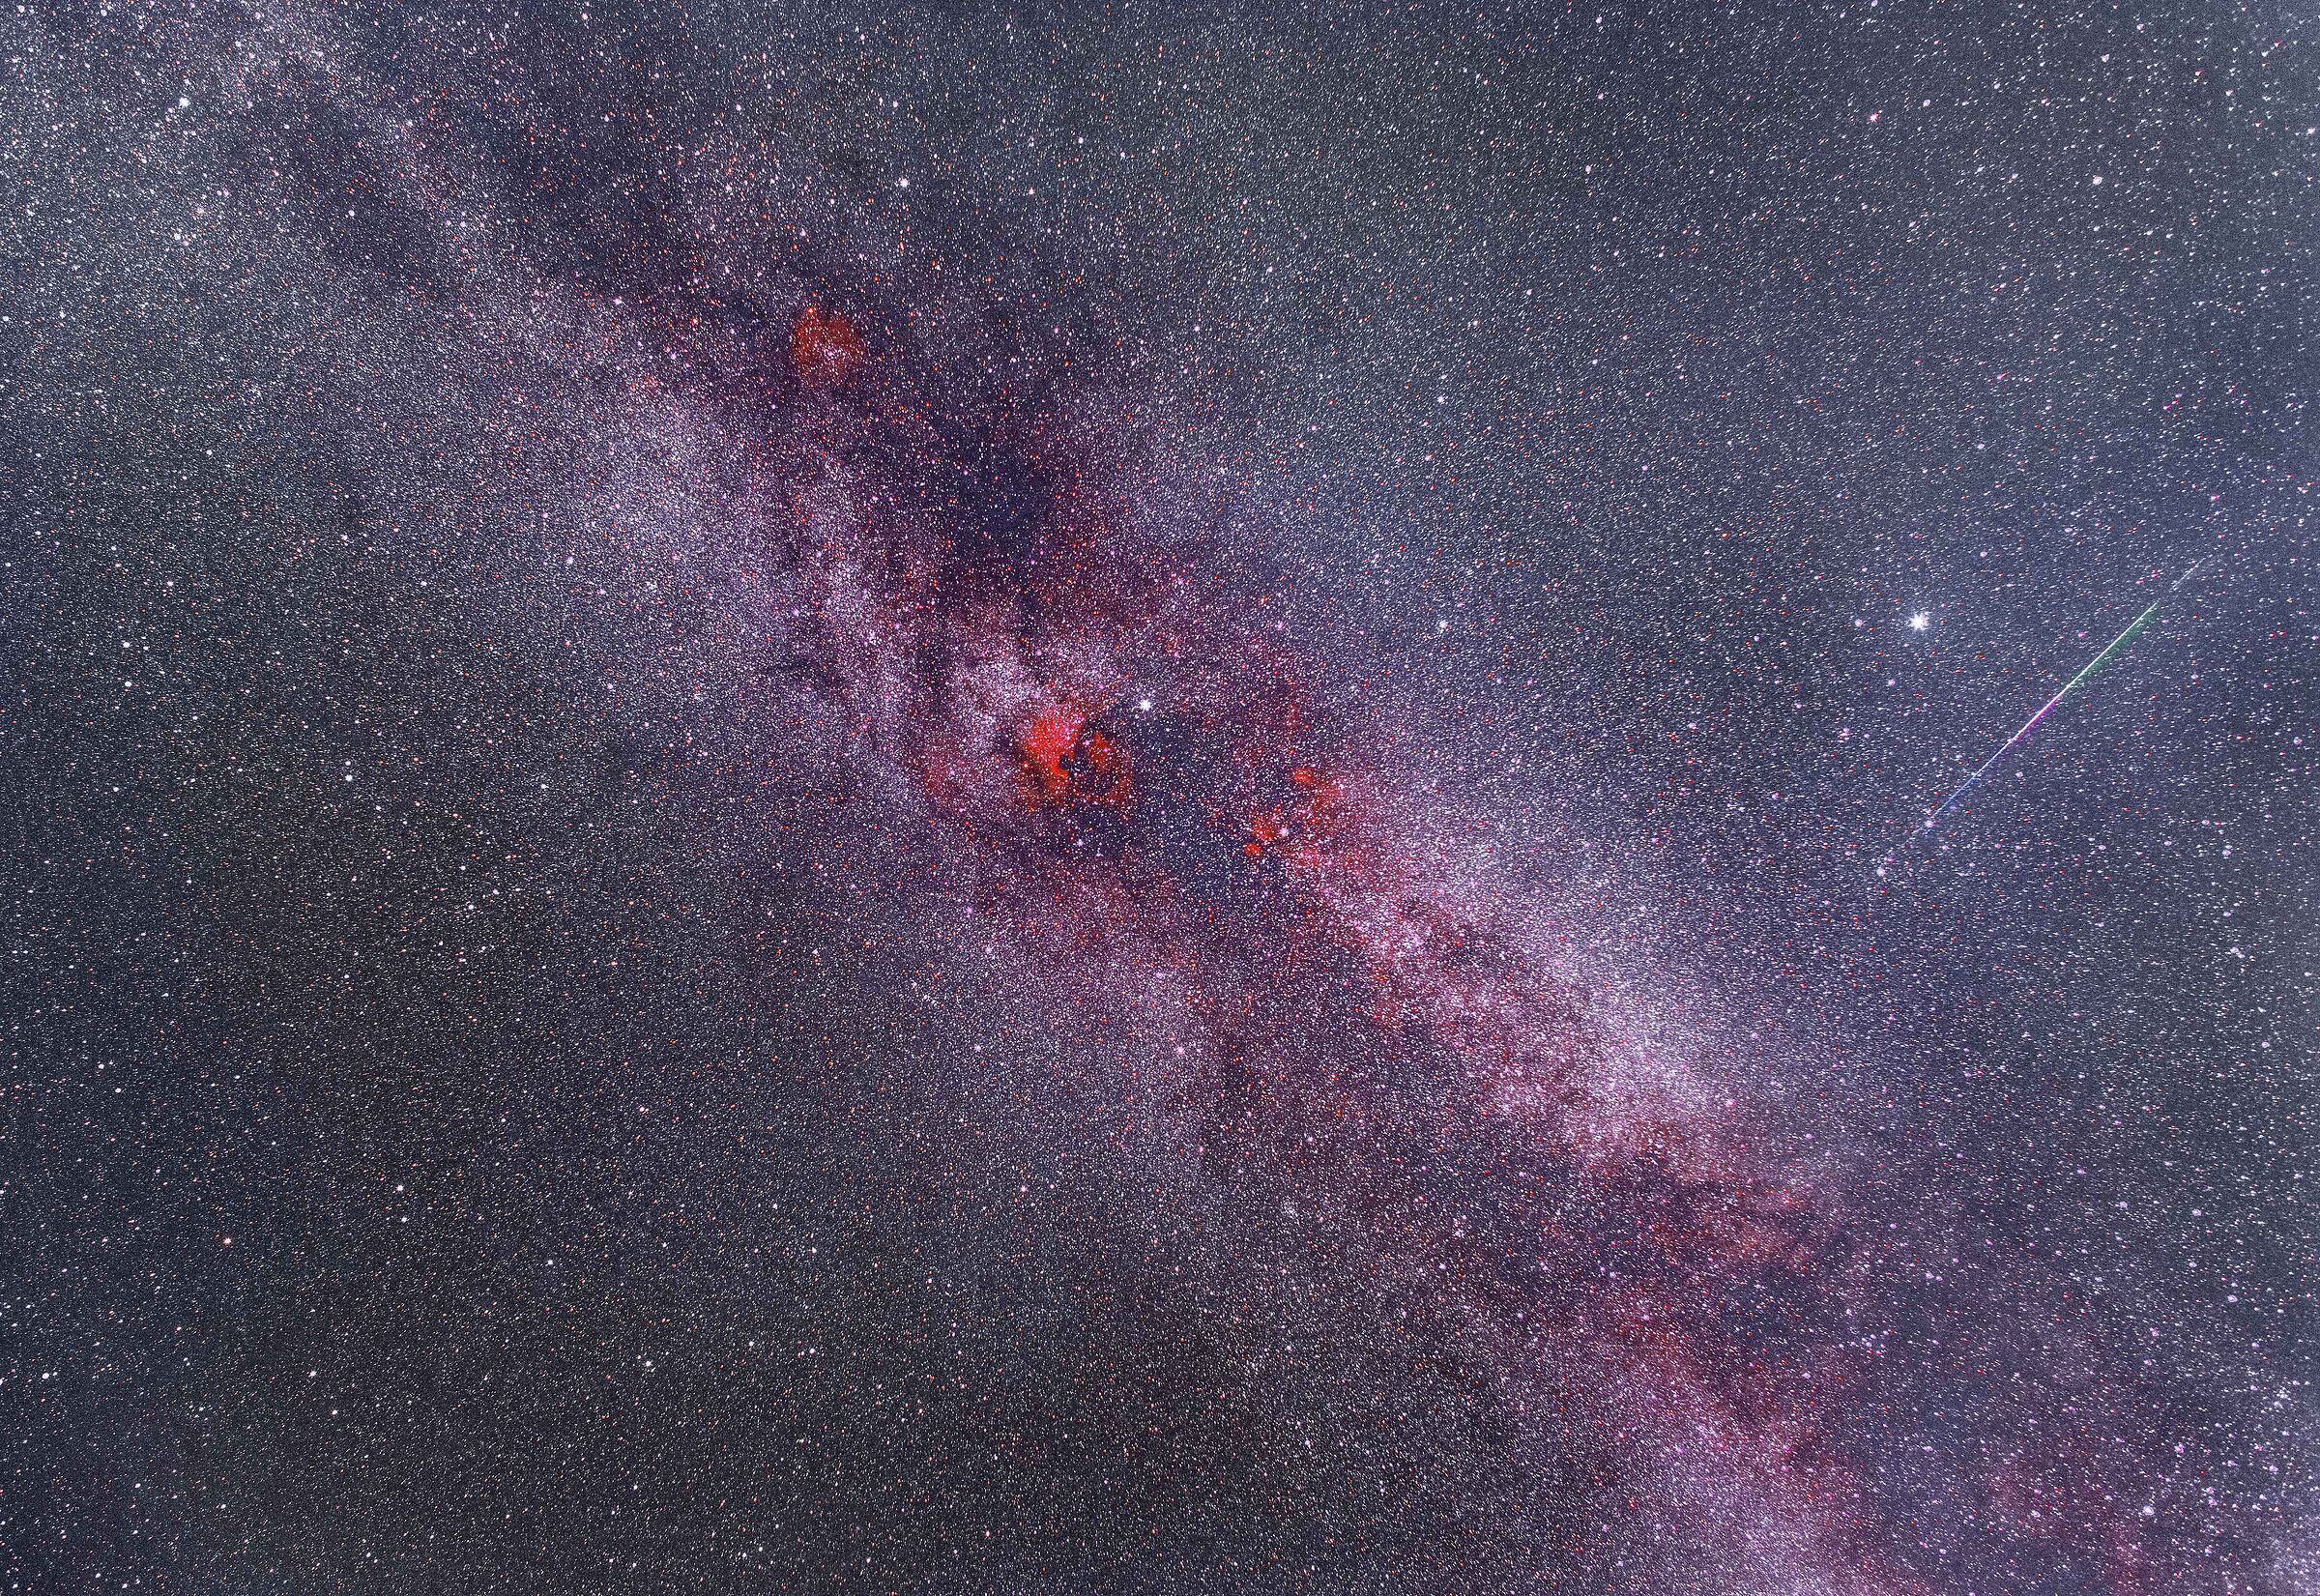 A Perseis between the Milky Way...